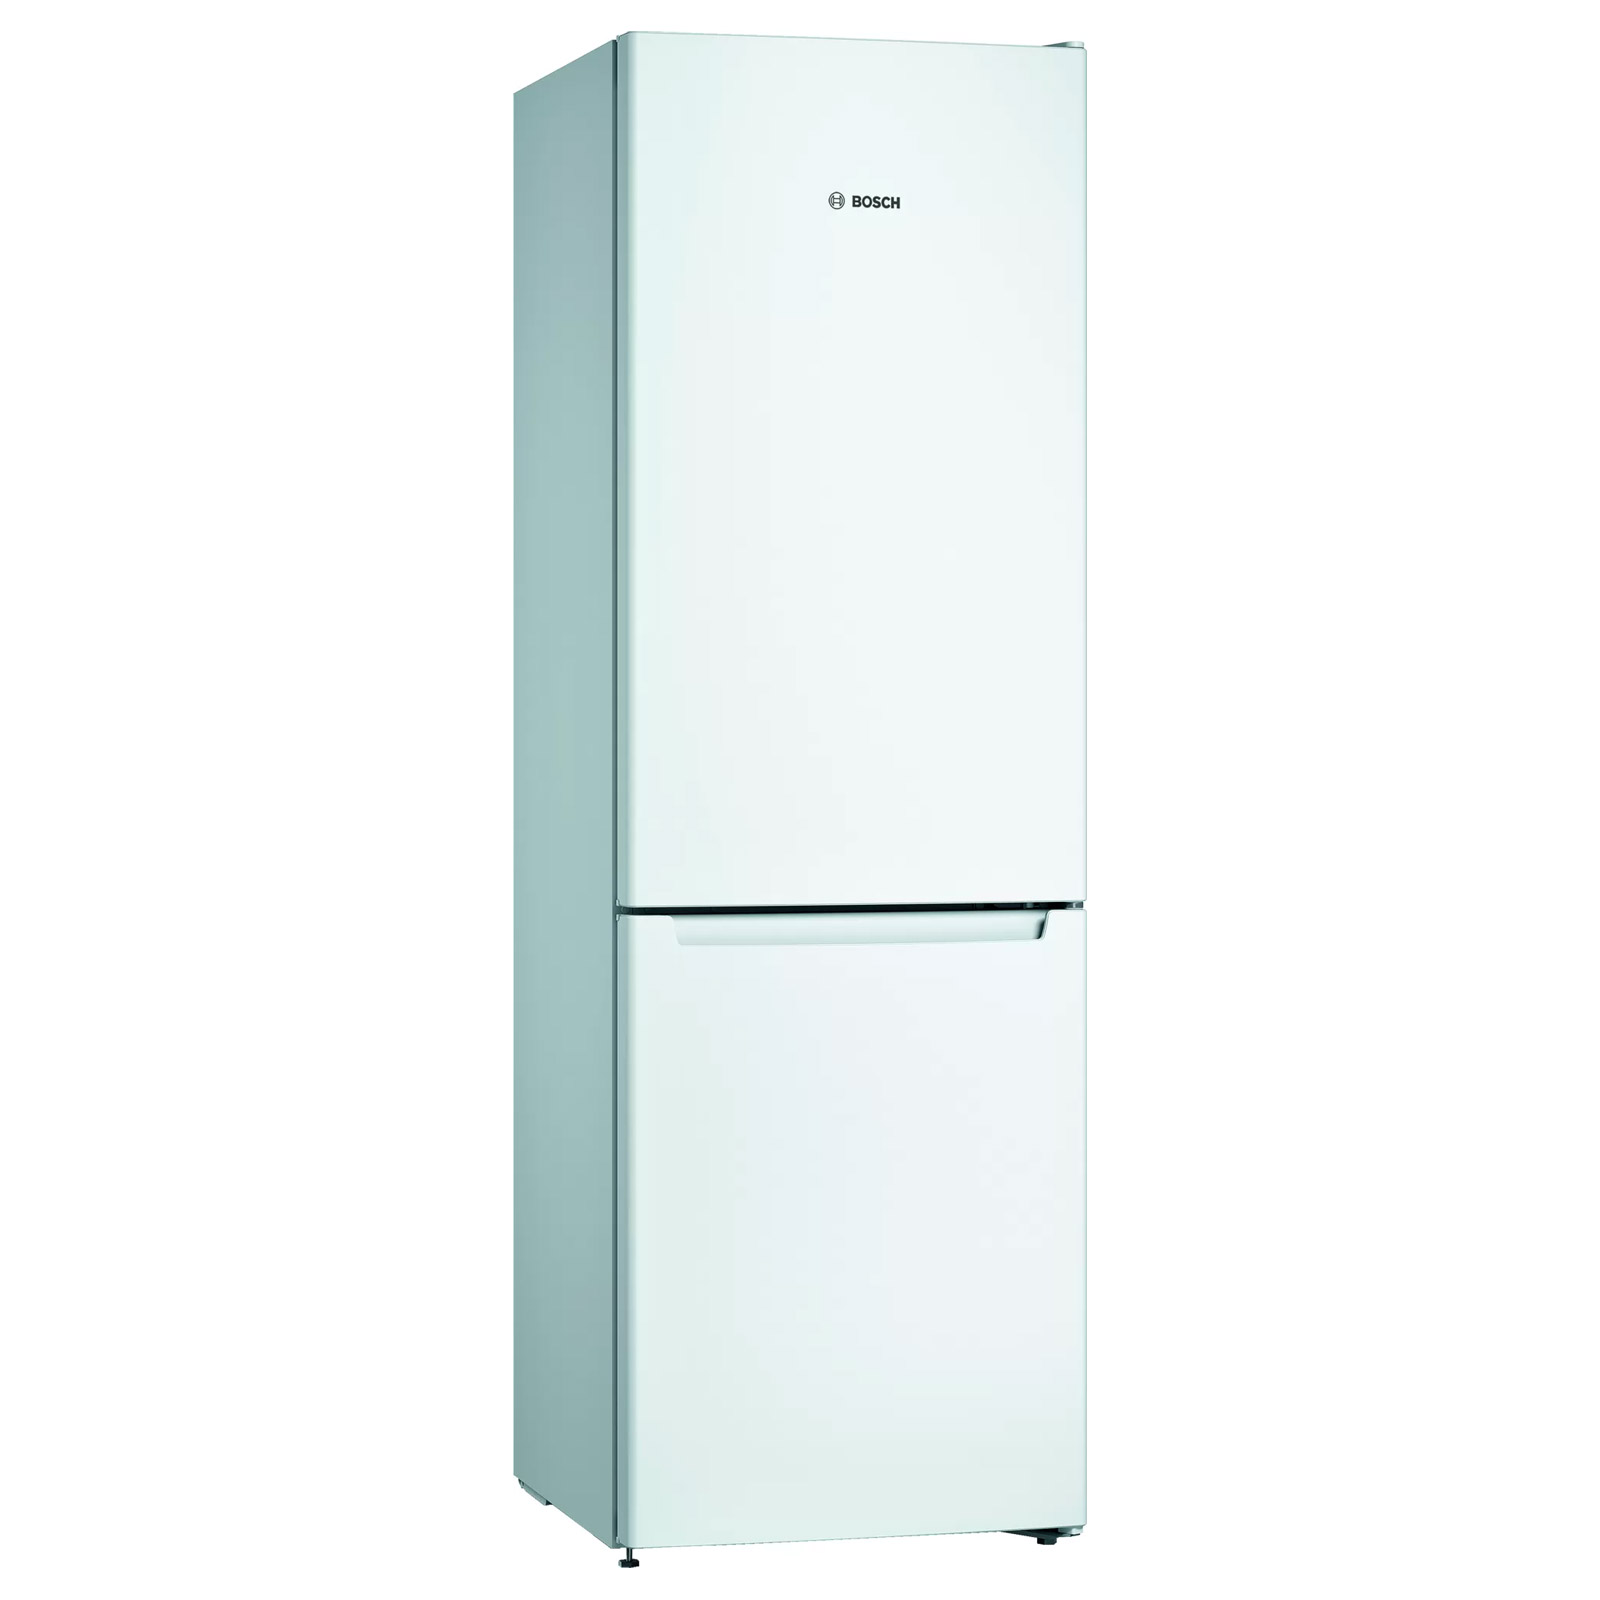 Image of Bosch KGN36NWEAG Series 2 60cm No Frost Fridge Freezer in White 1 86m